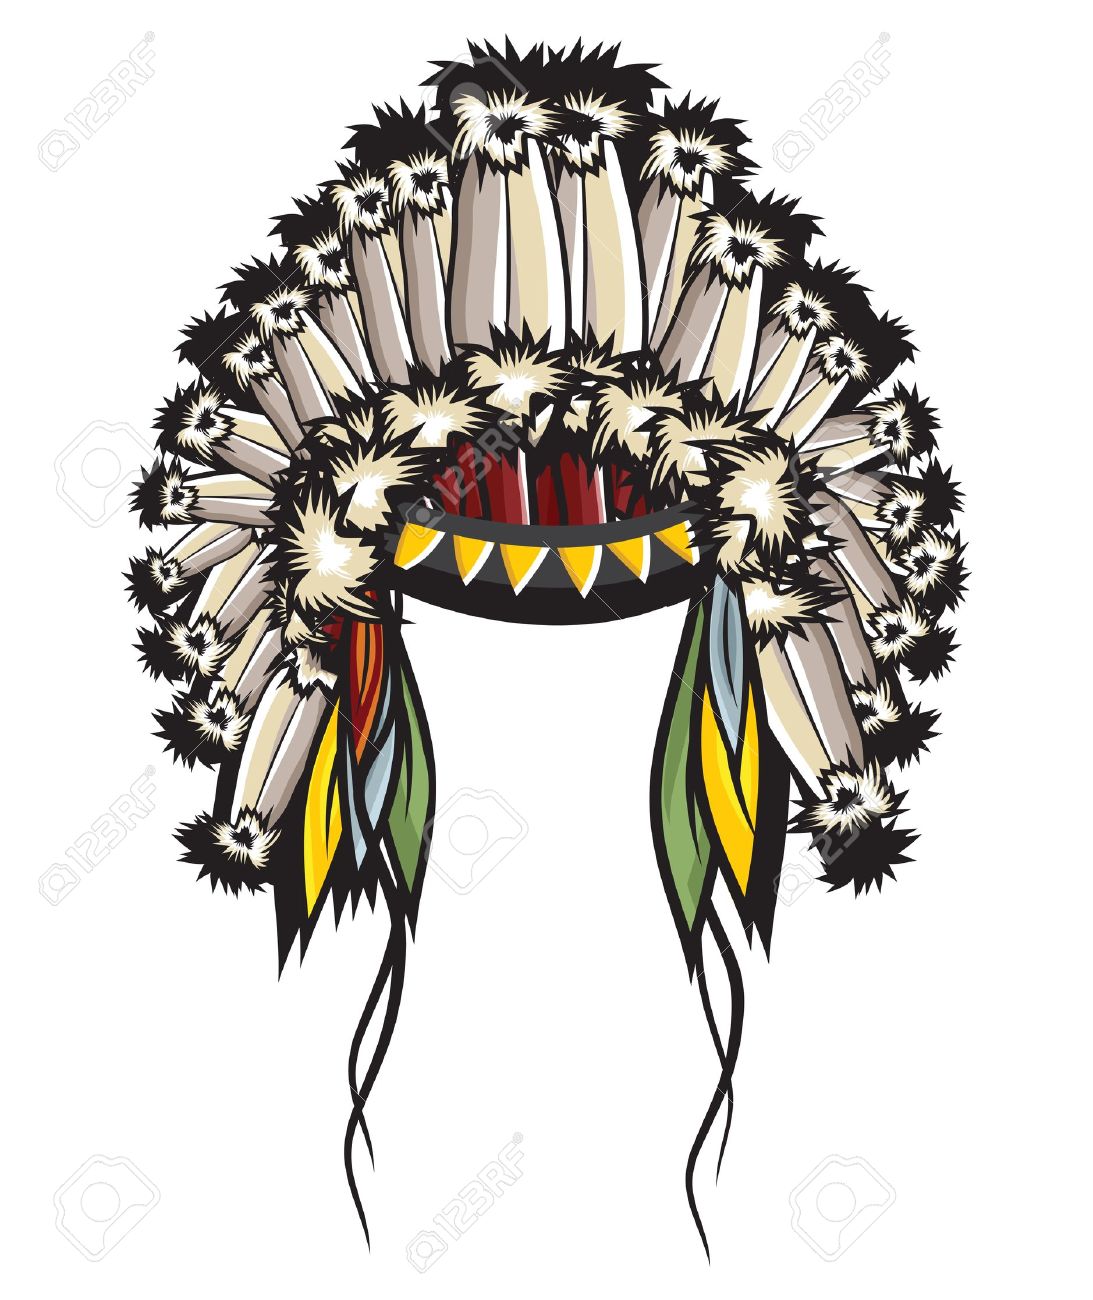 Headdress clipart #17, Download drawings